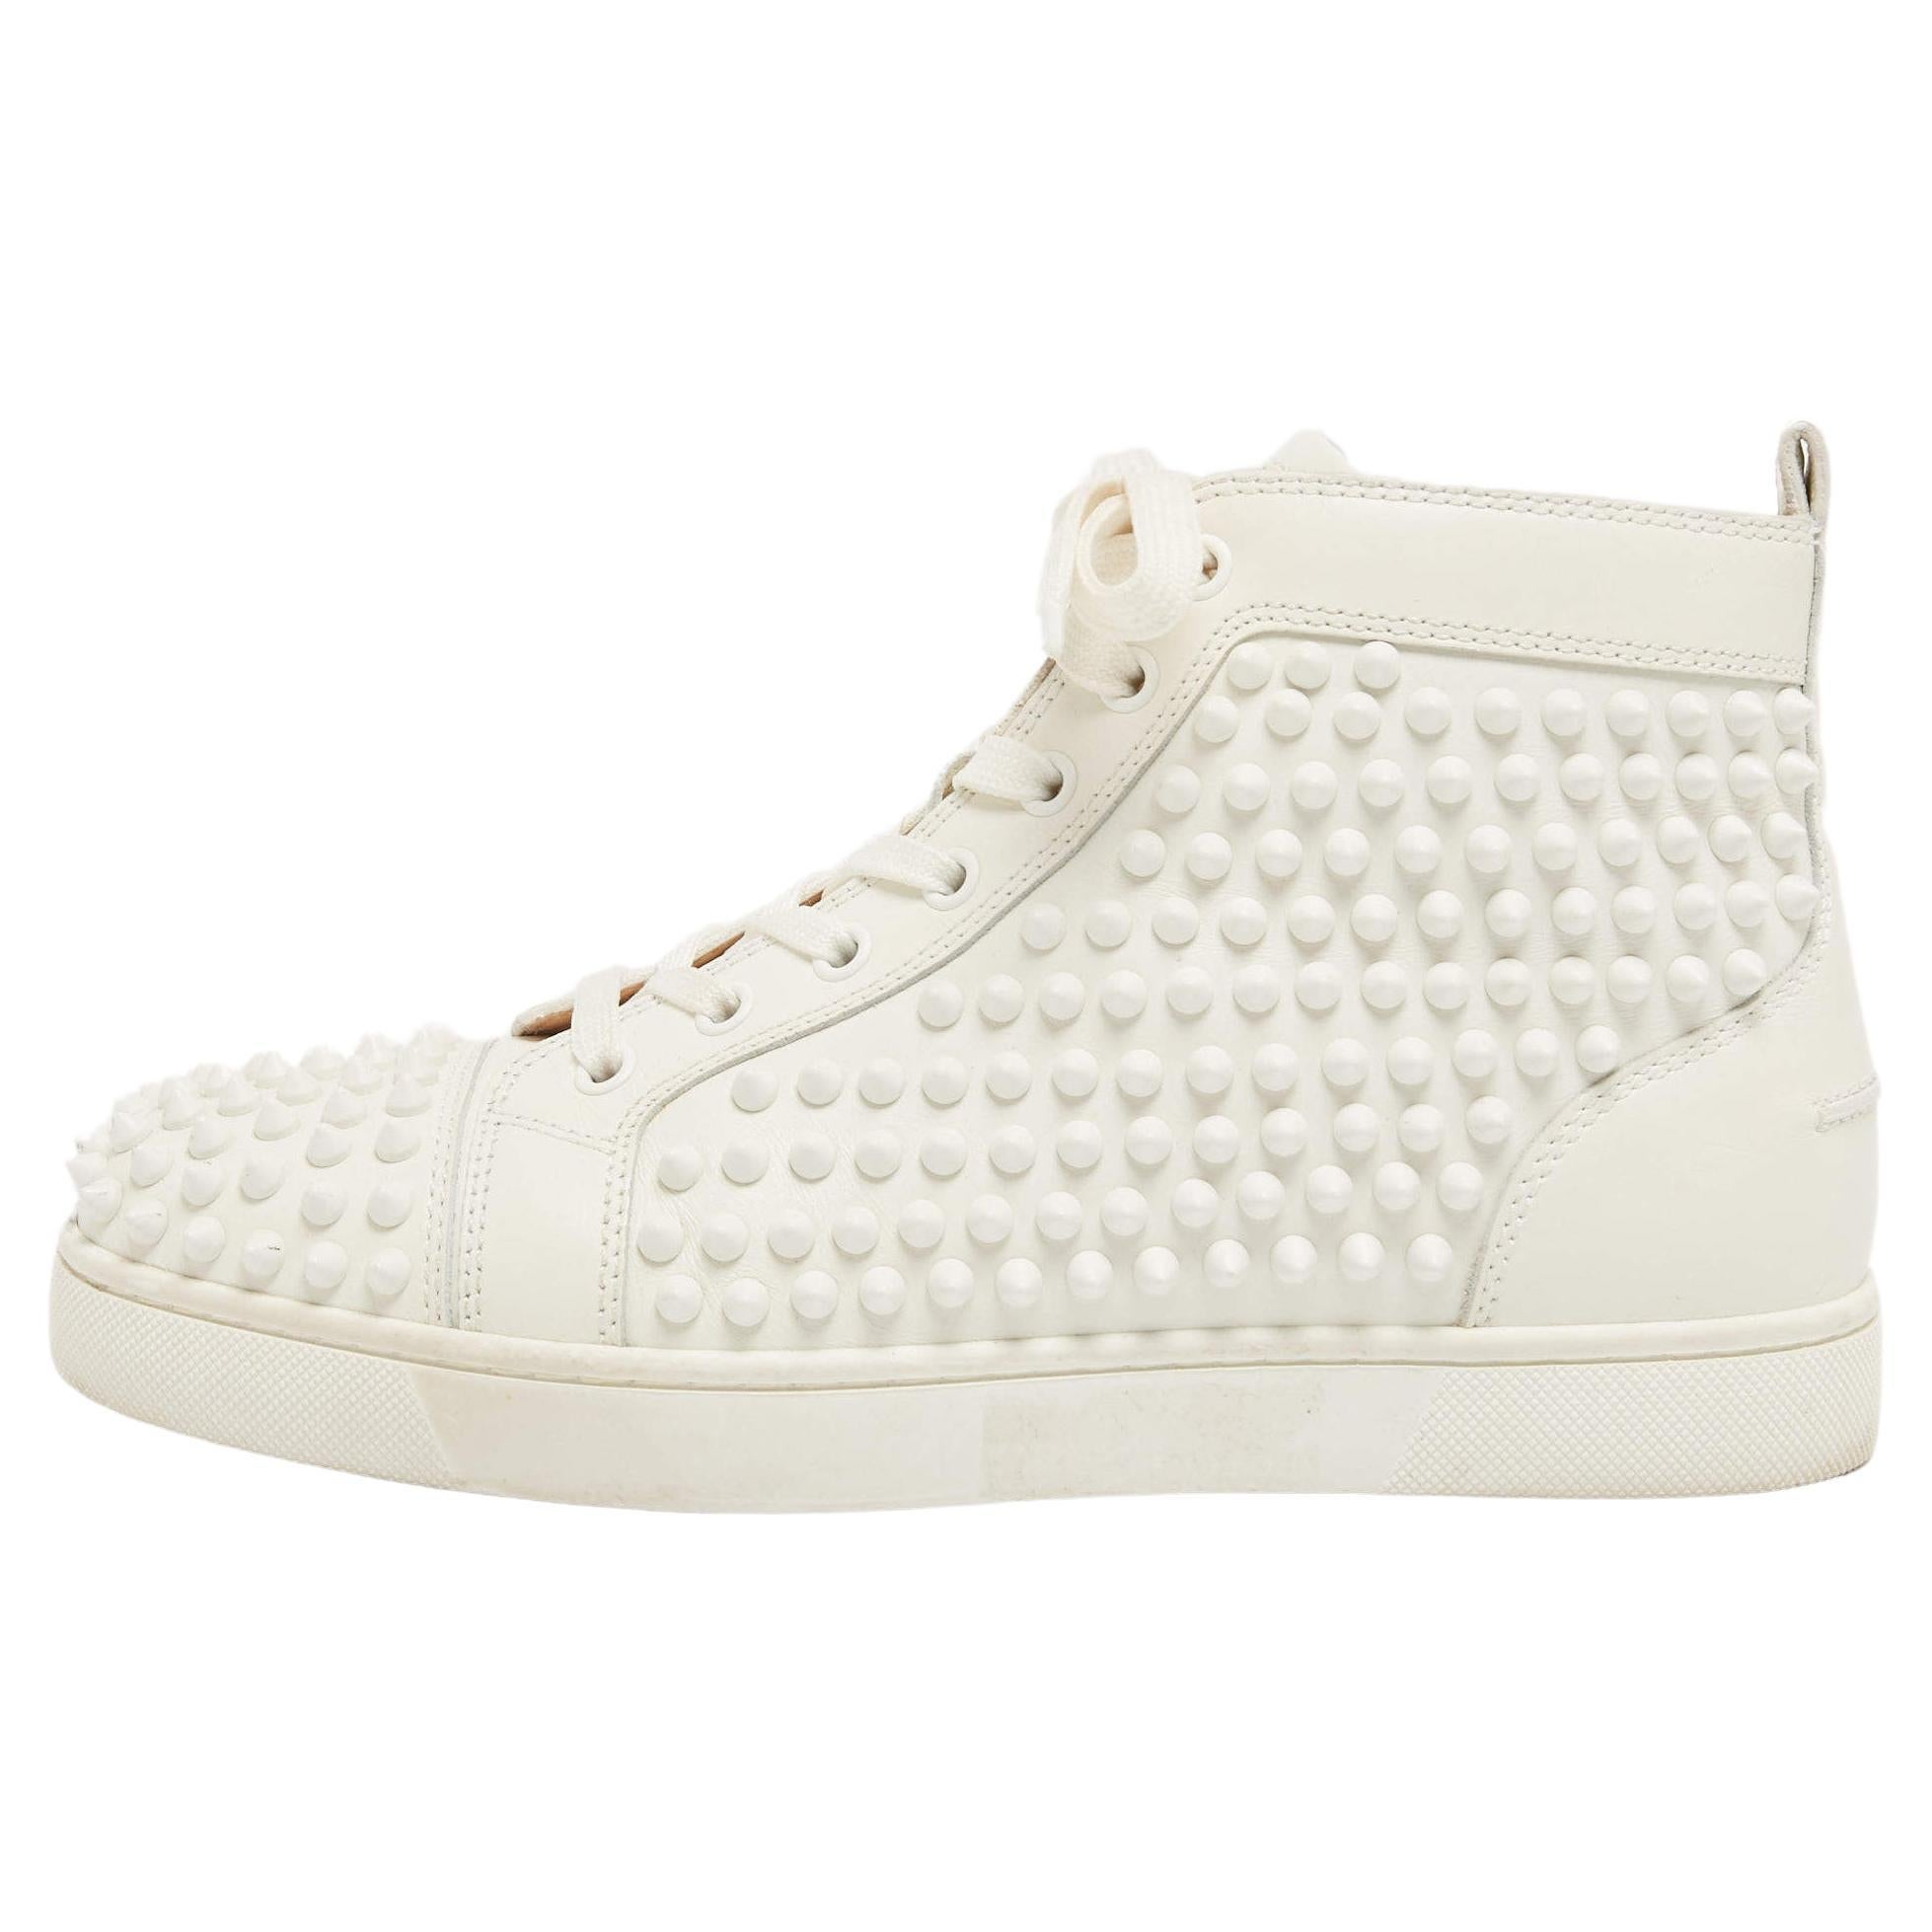 Christian Louboutin White Leather Louis Spikes High Top Sneakers Size 39 For Sale